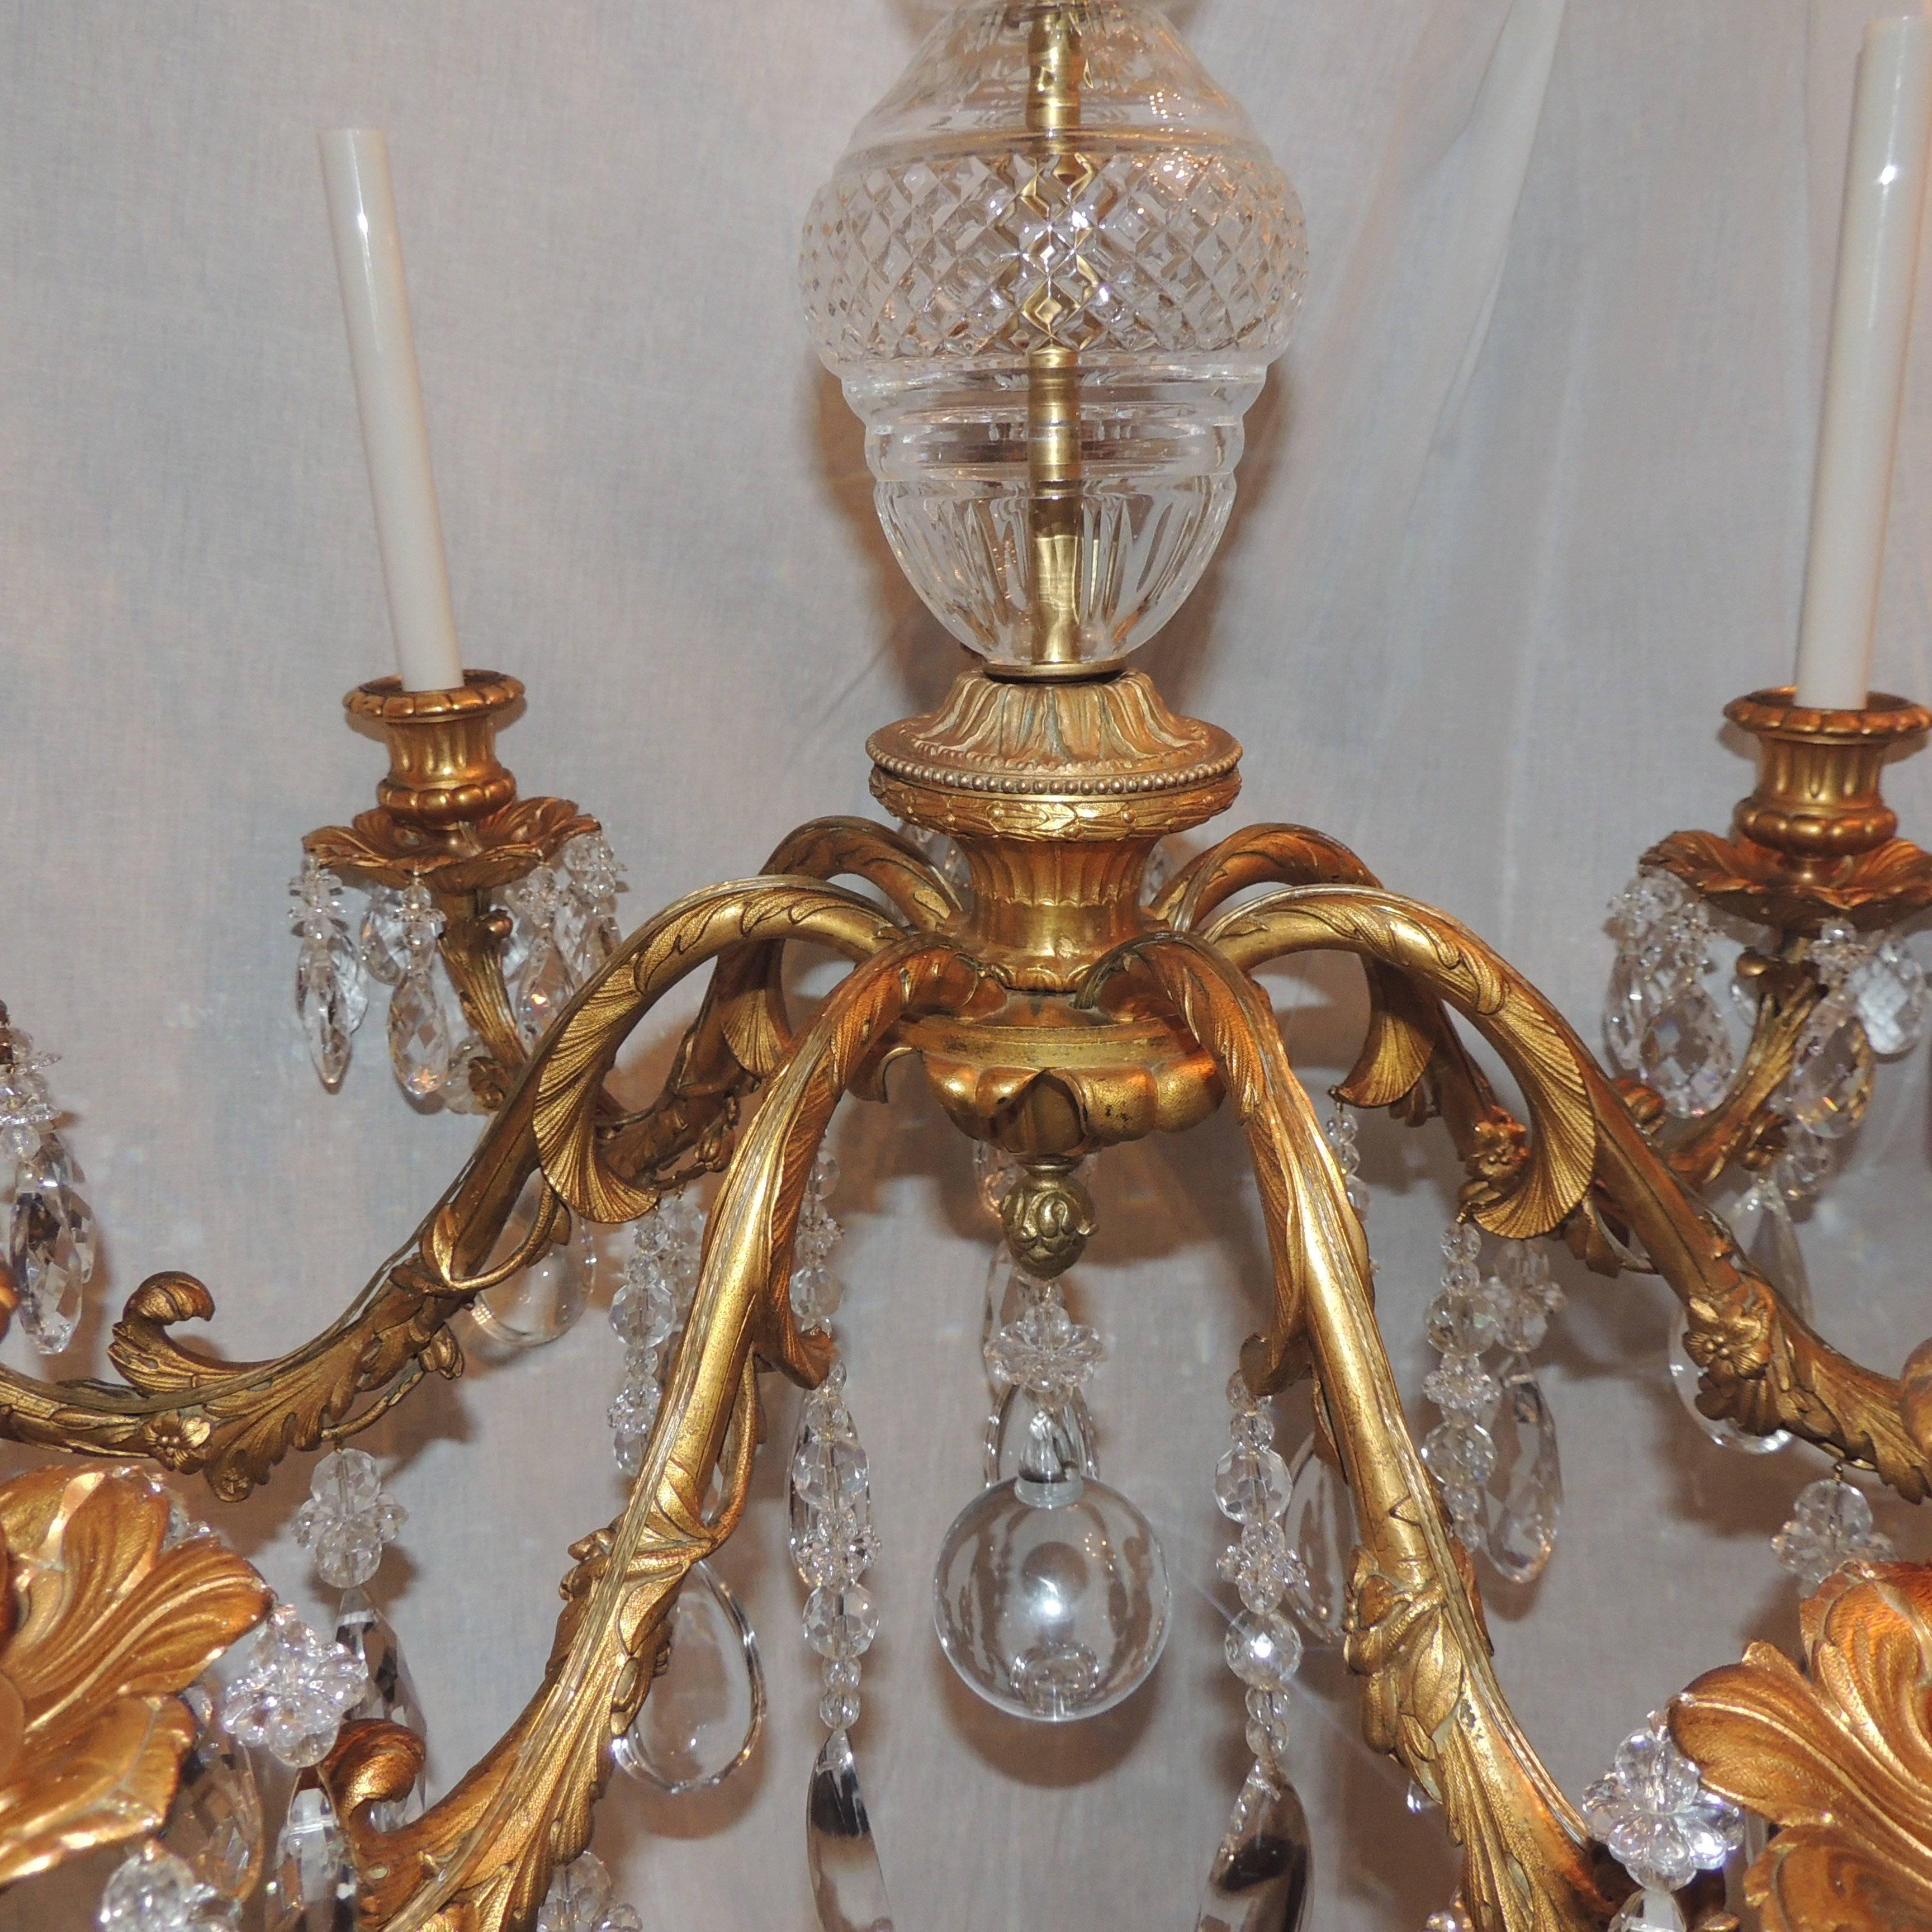 Early 20th Century Wonderful French Gilt Doré Bronze Fixture Seven-Light Crystal Chandelier For Sale